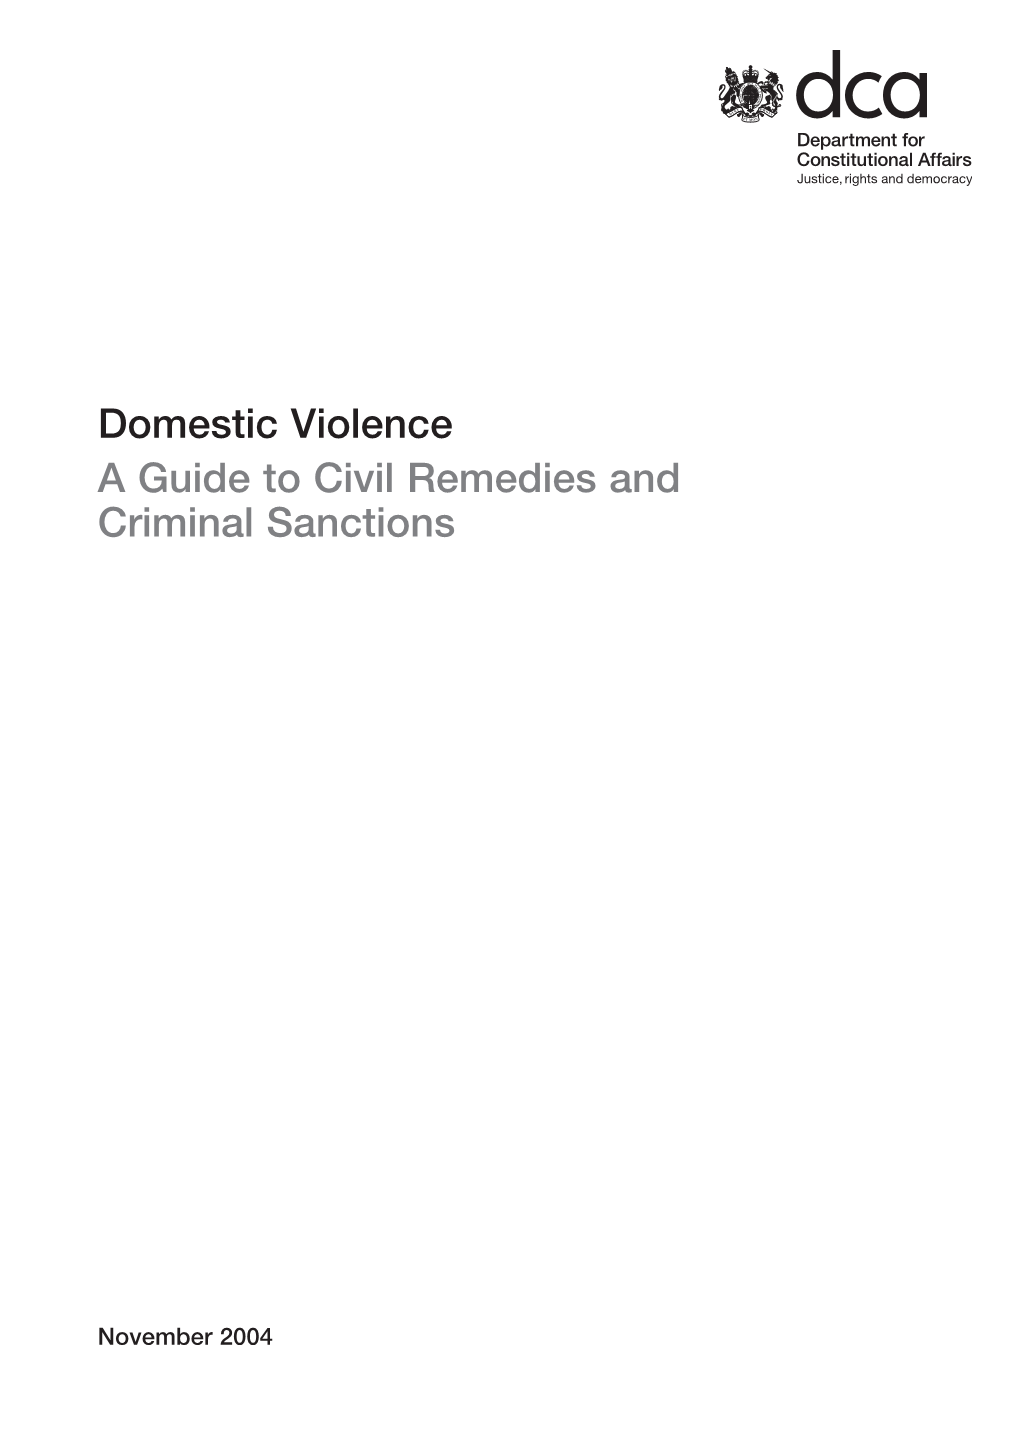 Domestic Violence a Guide to Civil Remedies and Criminal Sanctions